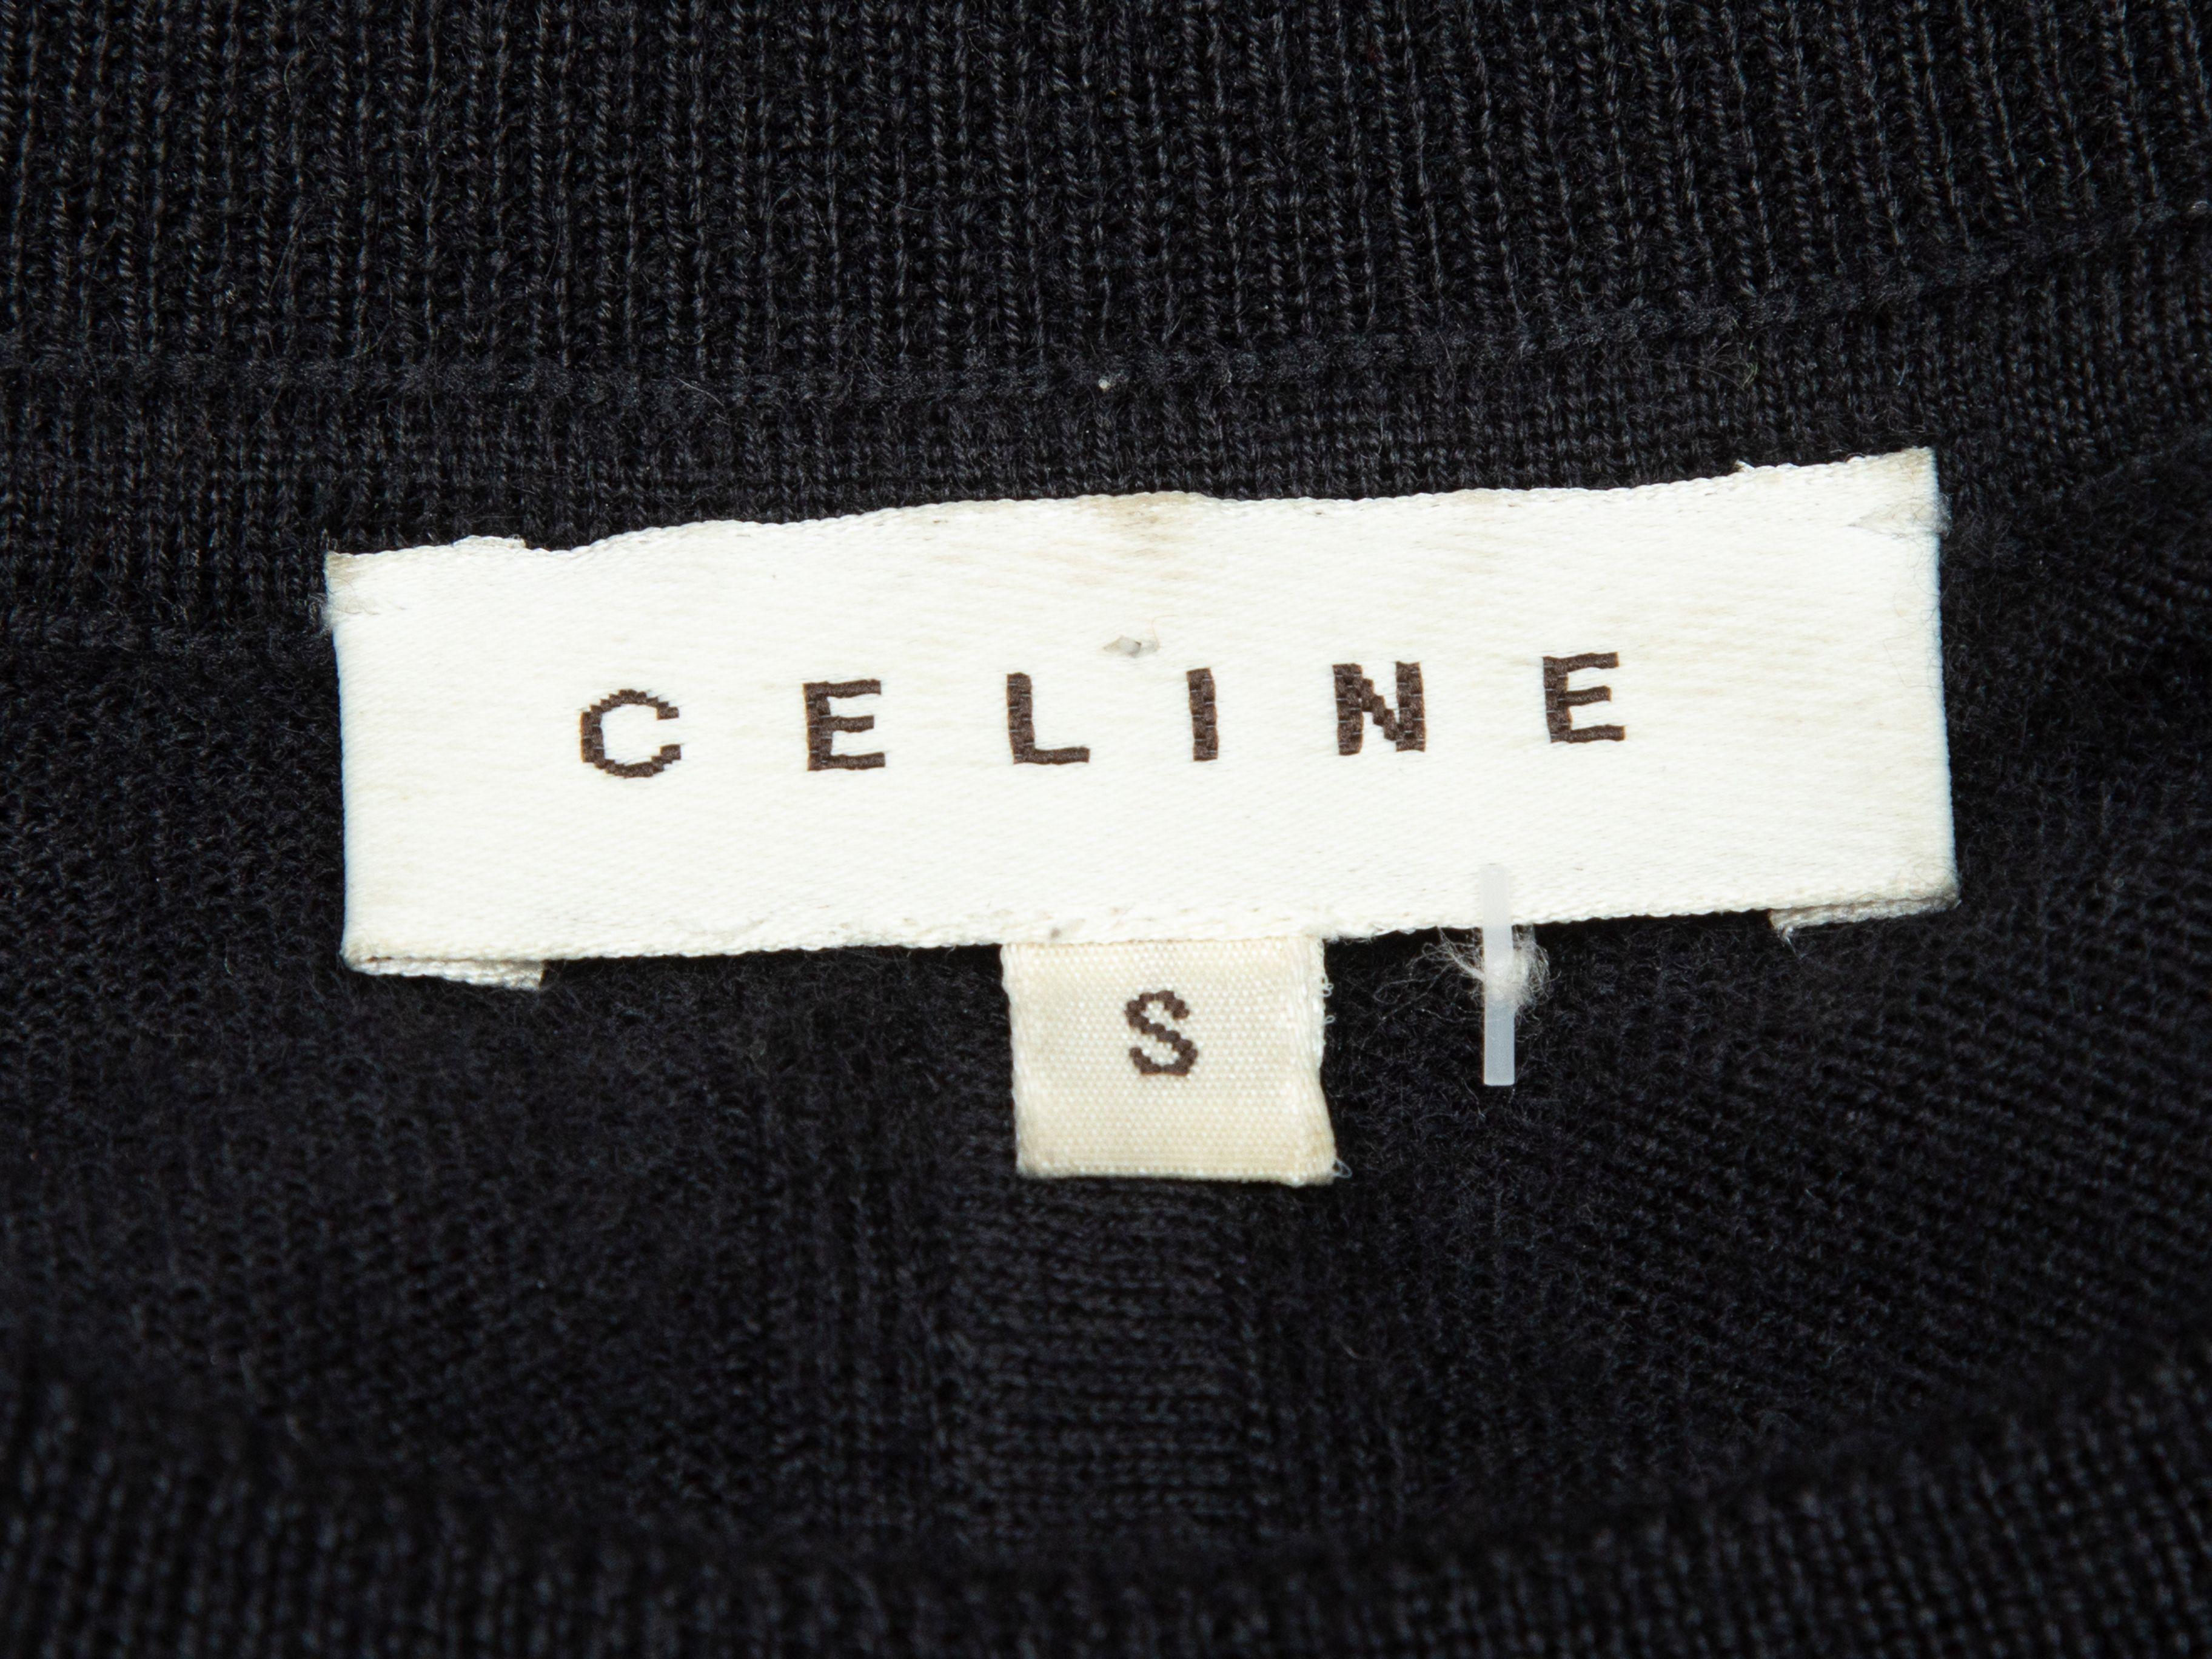 Product Details: Black cashmere and silk-blend top by Celine. Crew neck. Short dolman sleeves. 44